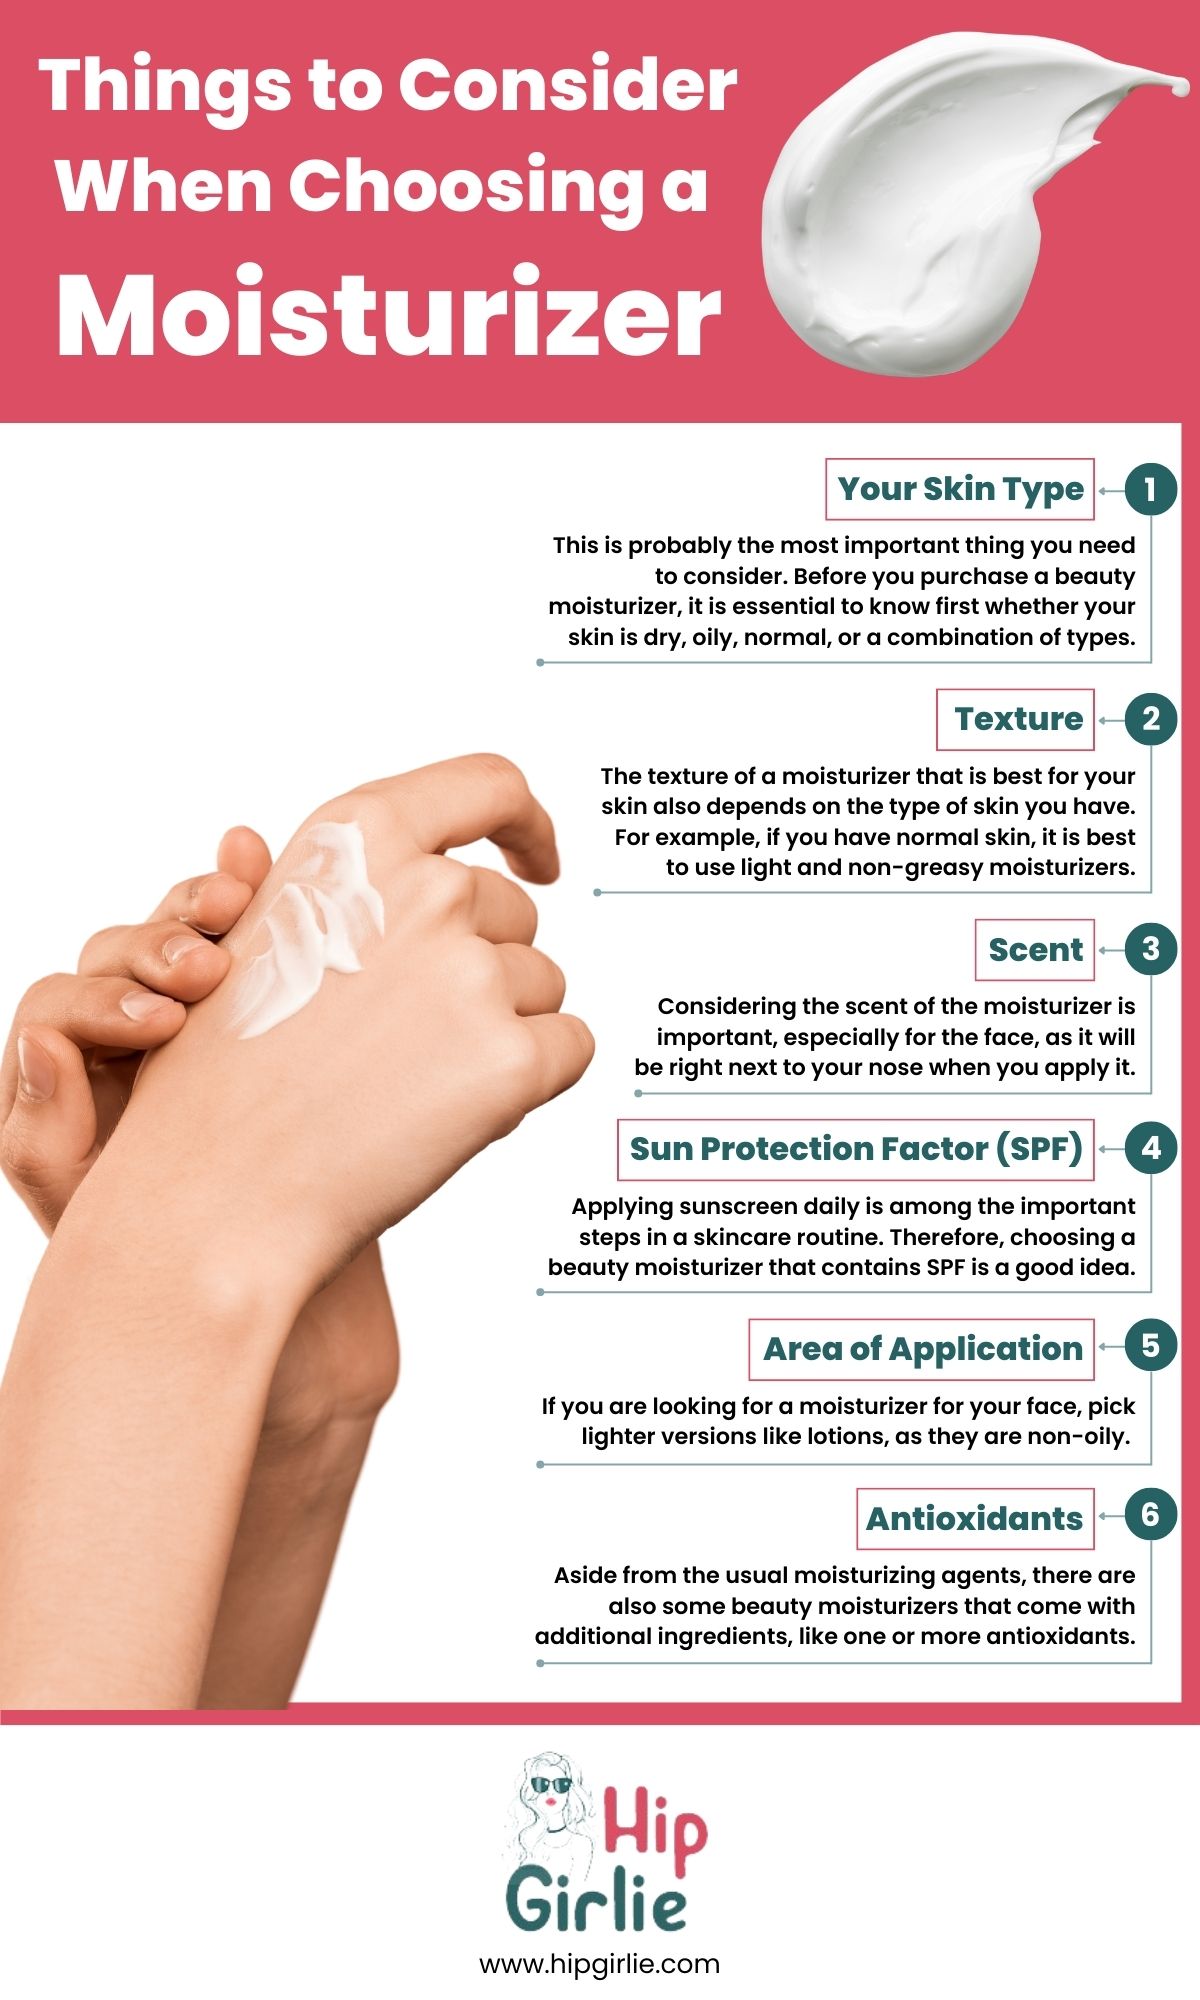 Things to Consider When Choosing a Moisturizer